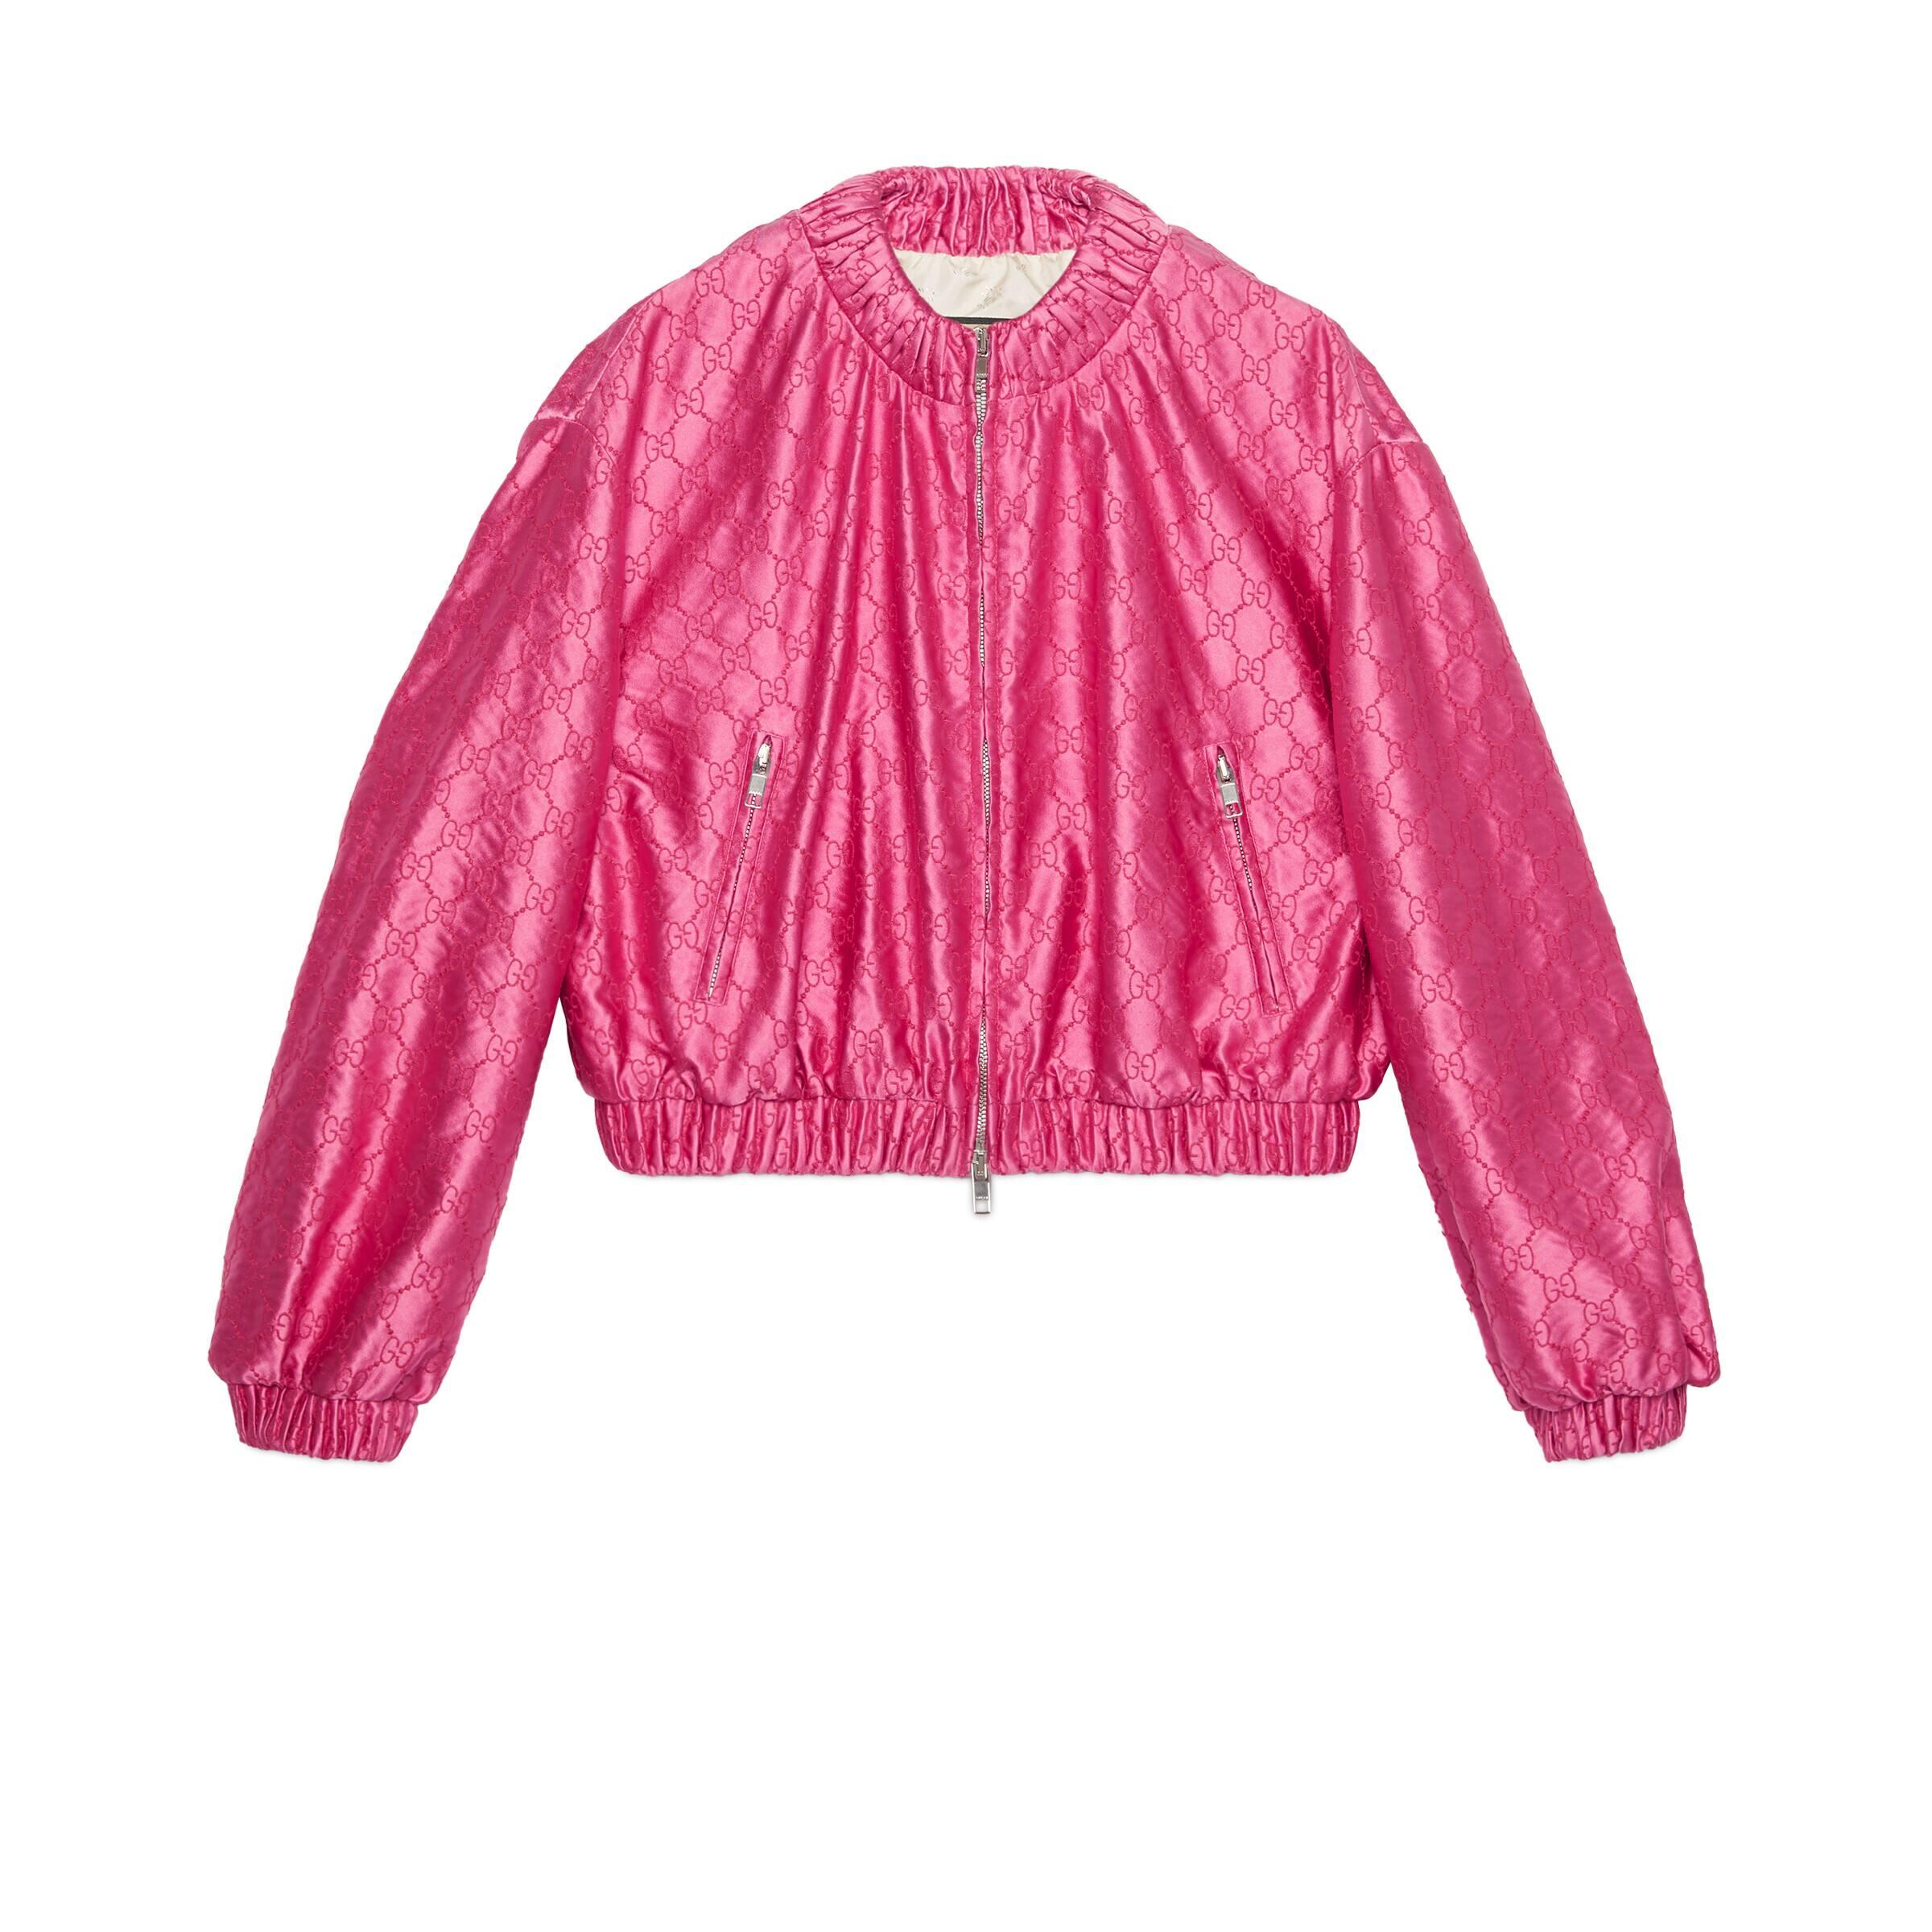 Gucci GG Embroidered Silk Jacket in Pink | Lyst